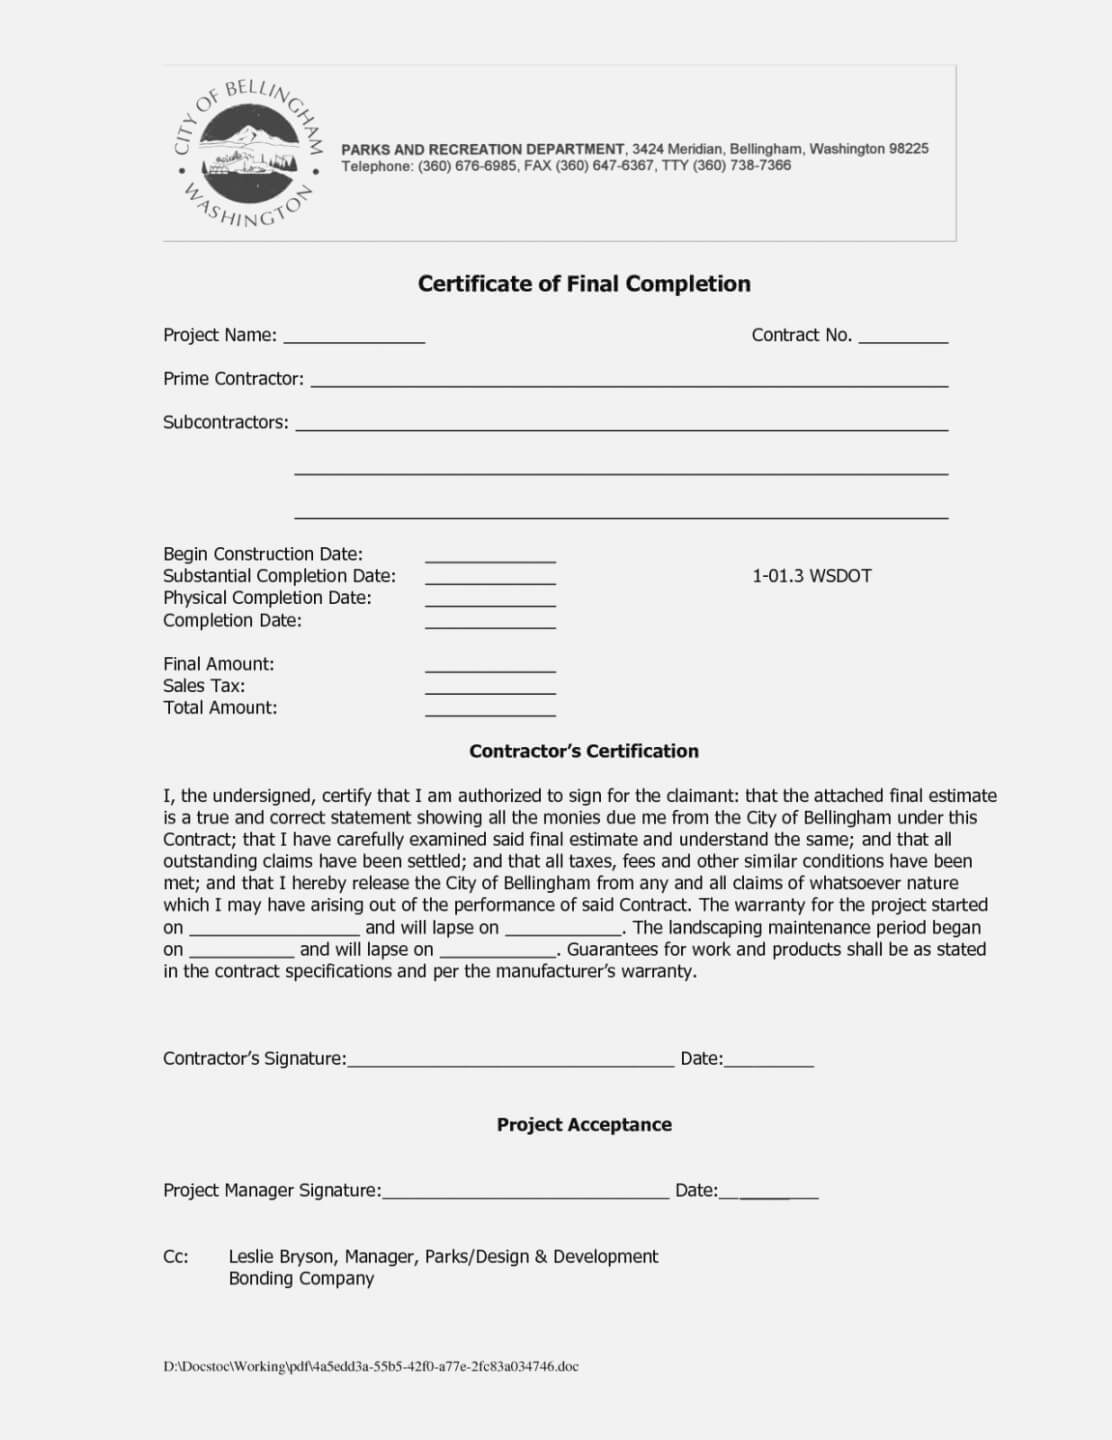 Roofing Certificate Of Completion Template – Yatay Pertaining To Construction Certificate Of Completion Template